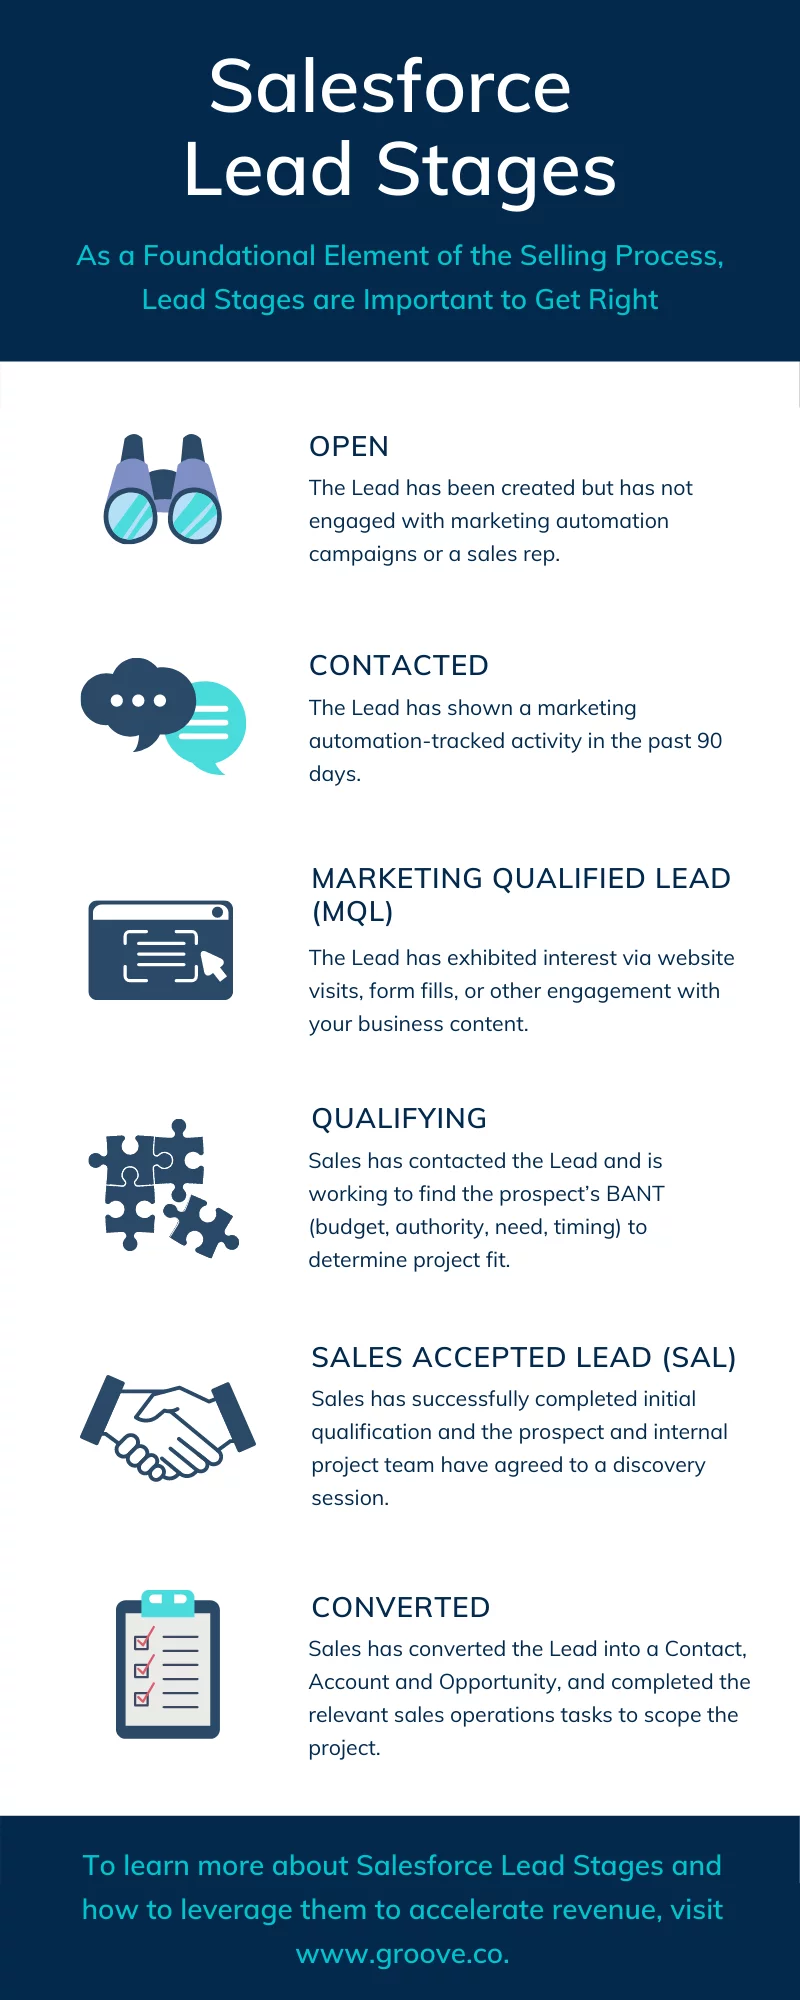 Graphic describing Salesforce lead stages: Open, Contacted, Marketing Qualified Lead, Qualifying, Sales Accepted Lead, Converted